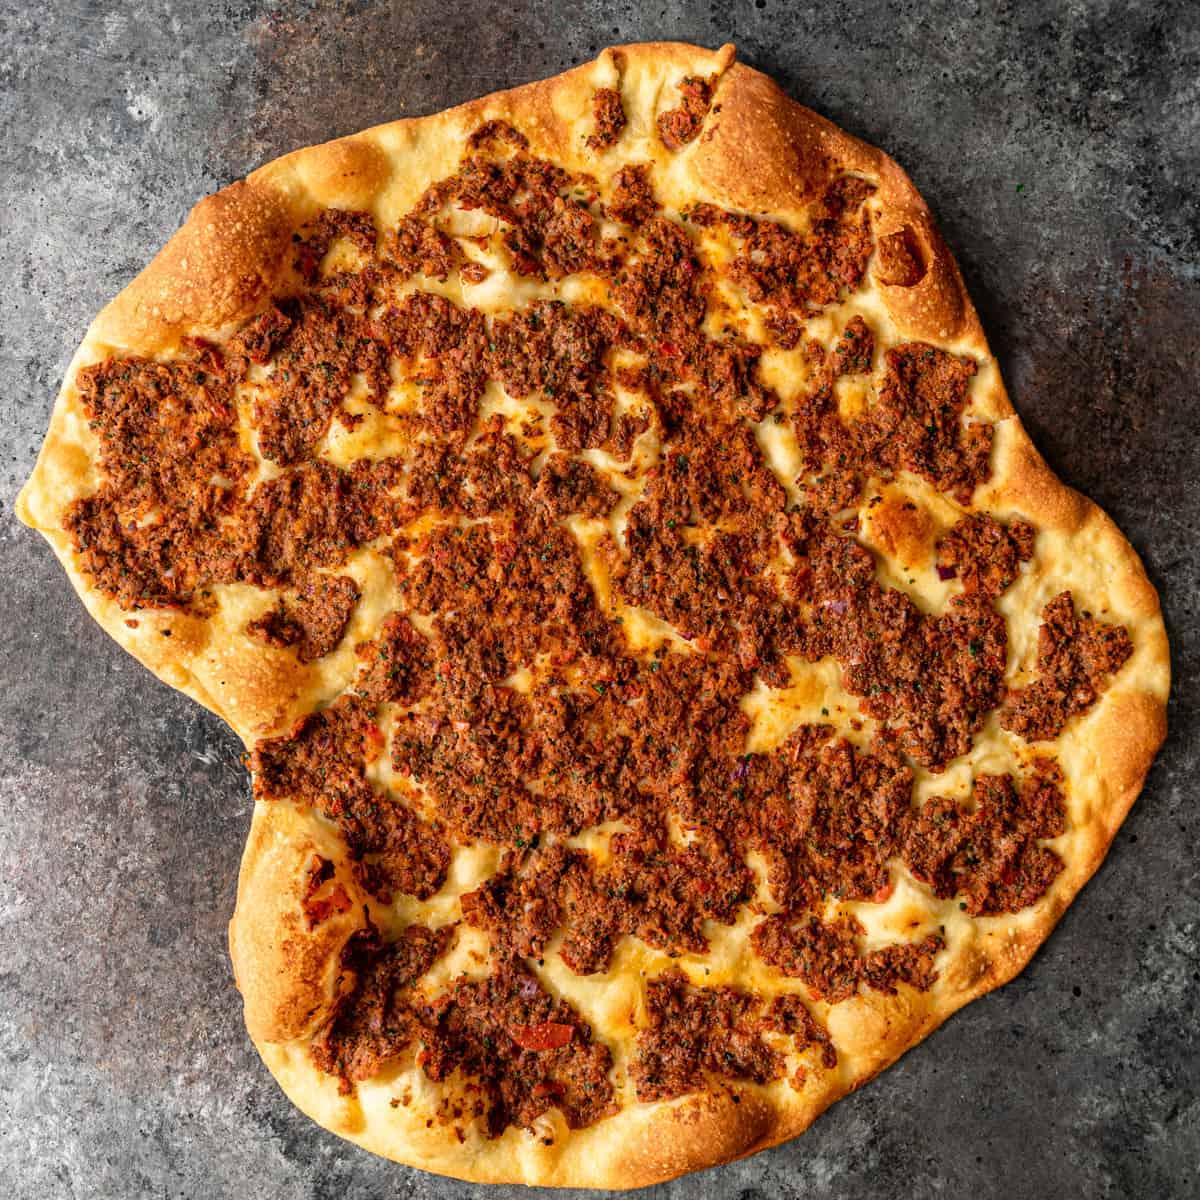 overhead image: golden brown flatbread pizza topped with lamb mince